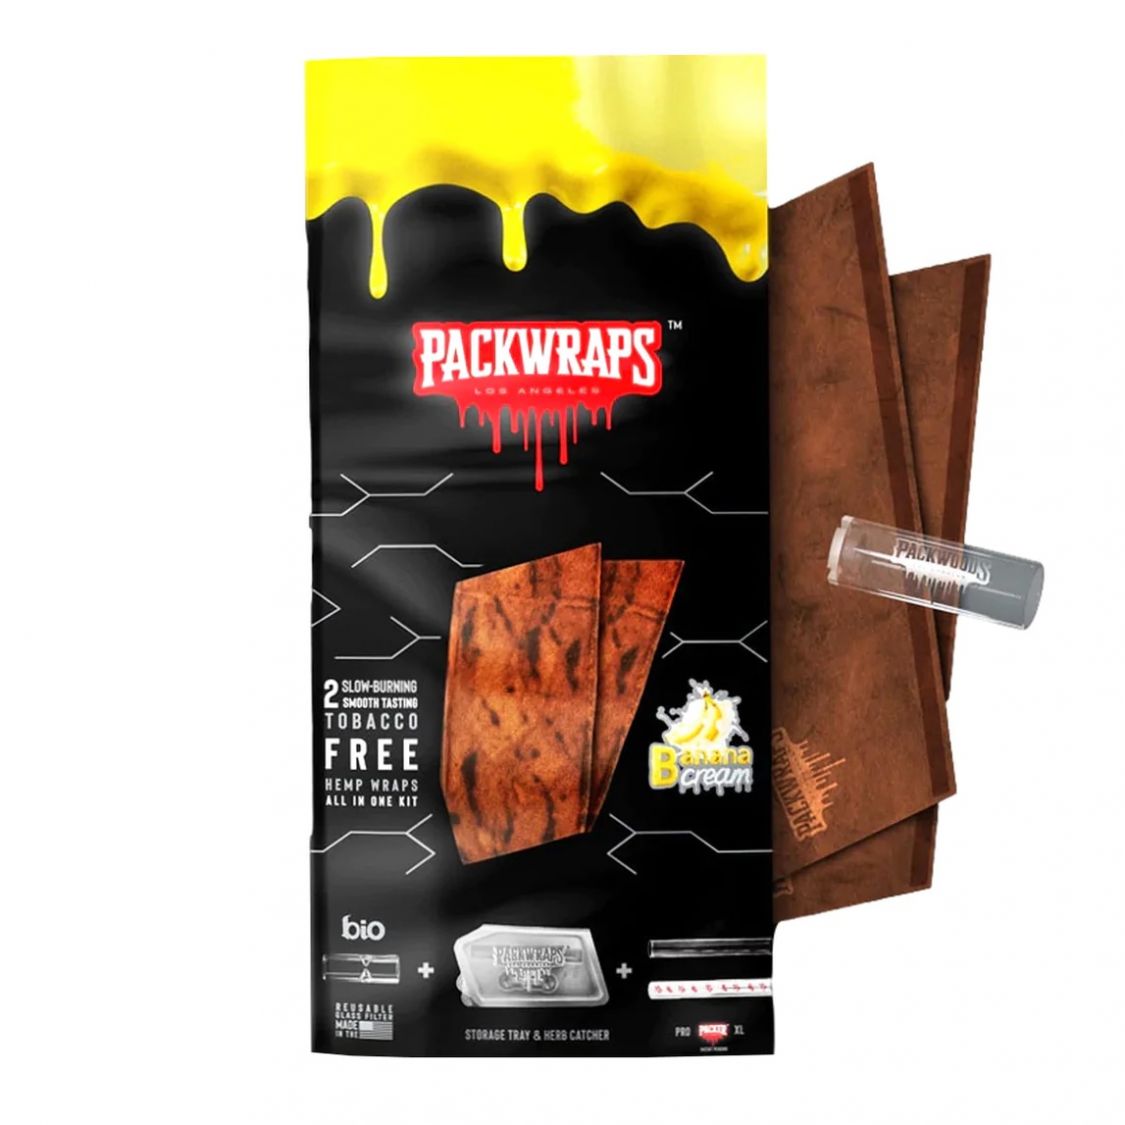 PACKWRAPS Banana Cream Packwraps Accessories Paper / Rolling Supplies